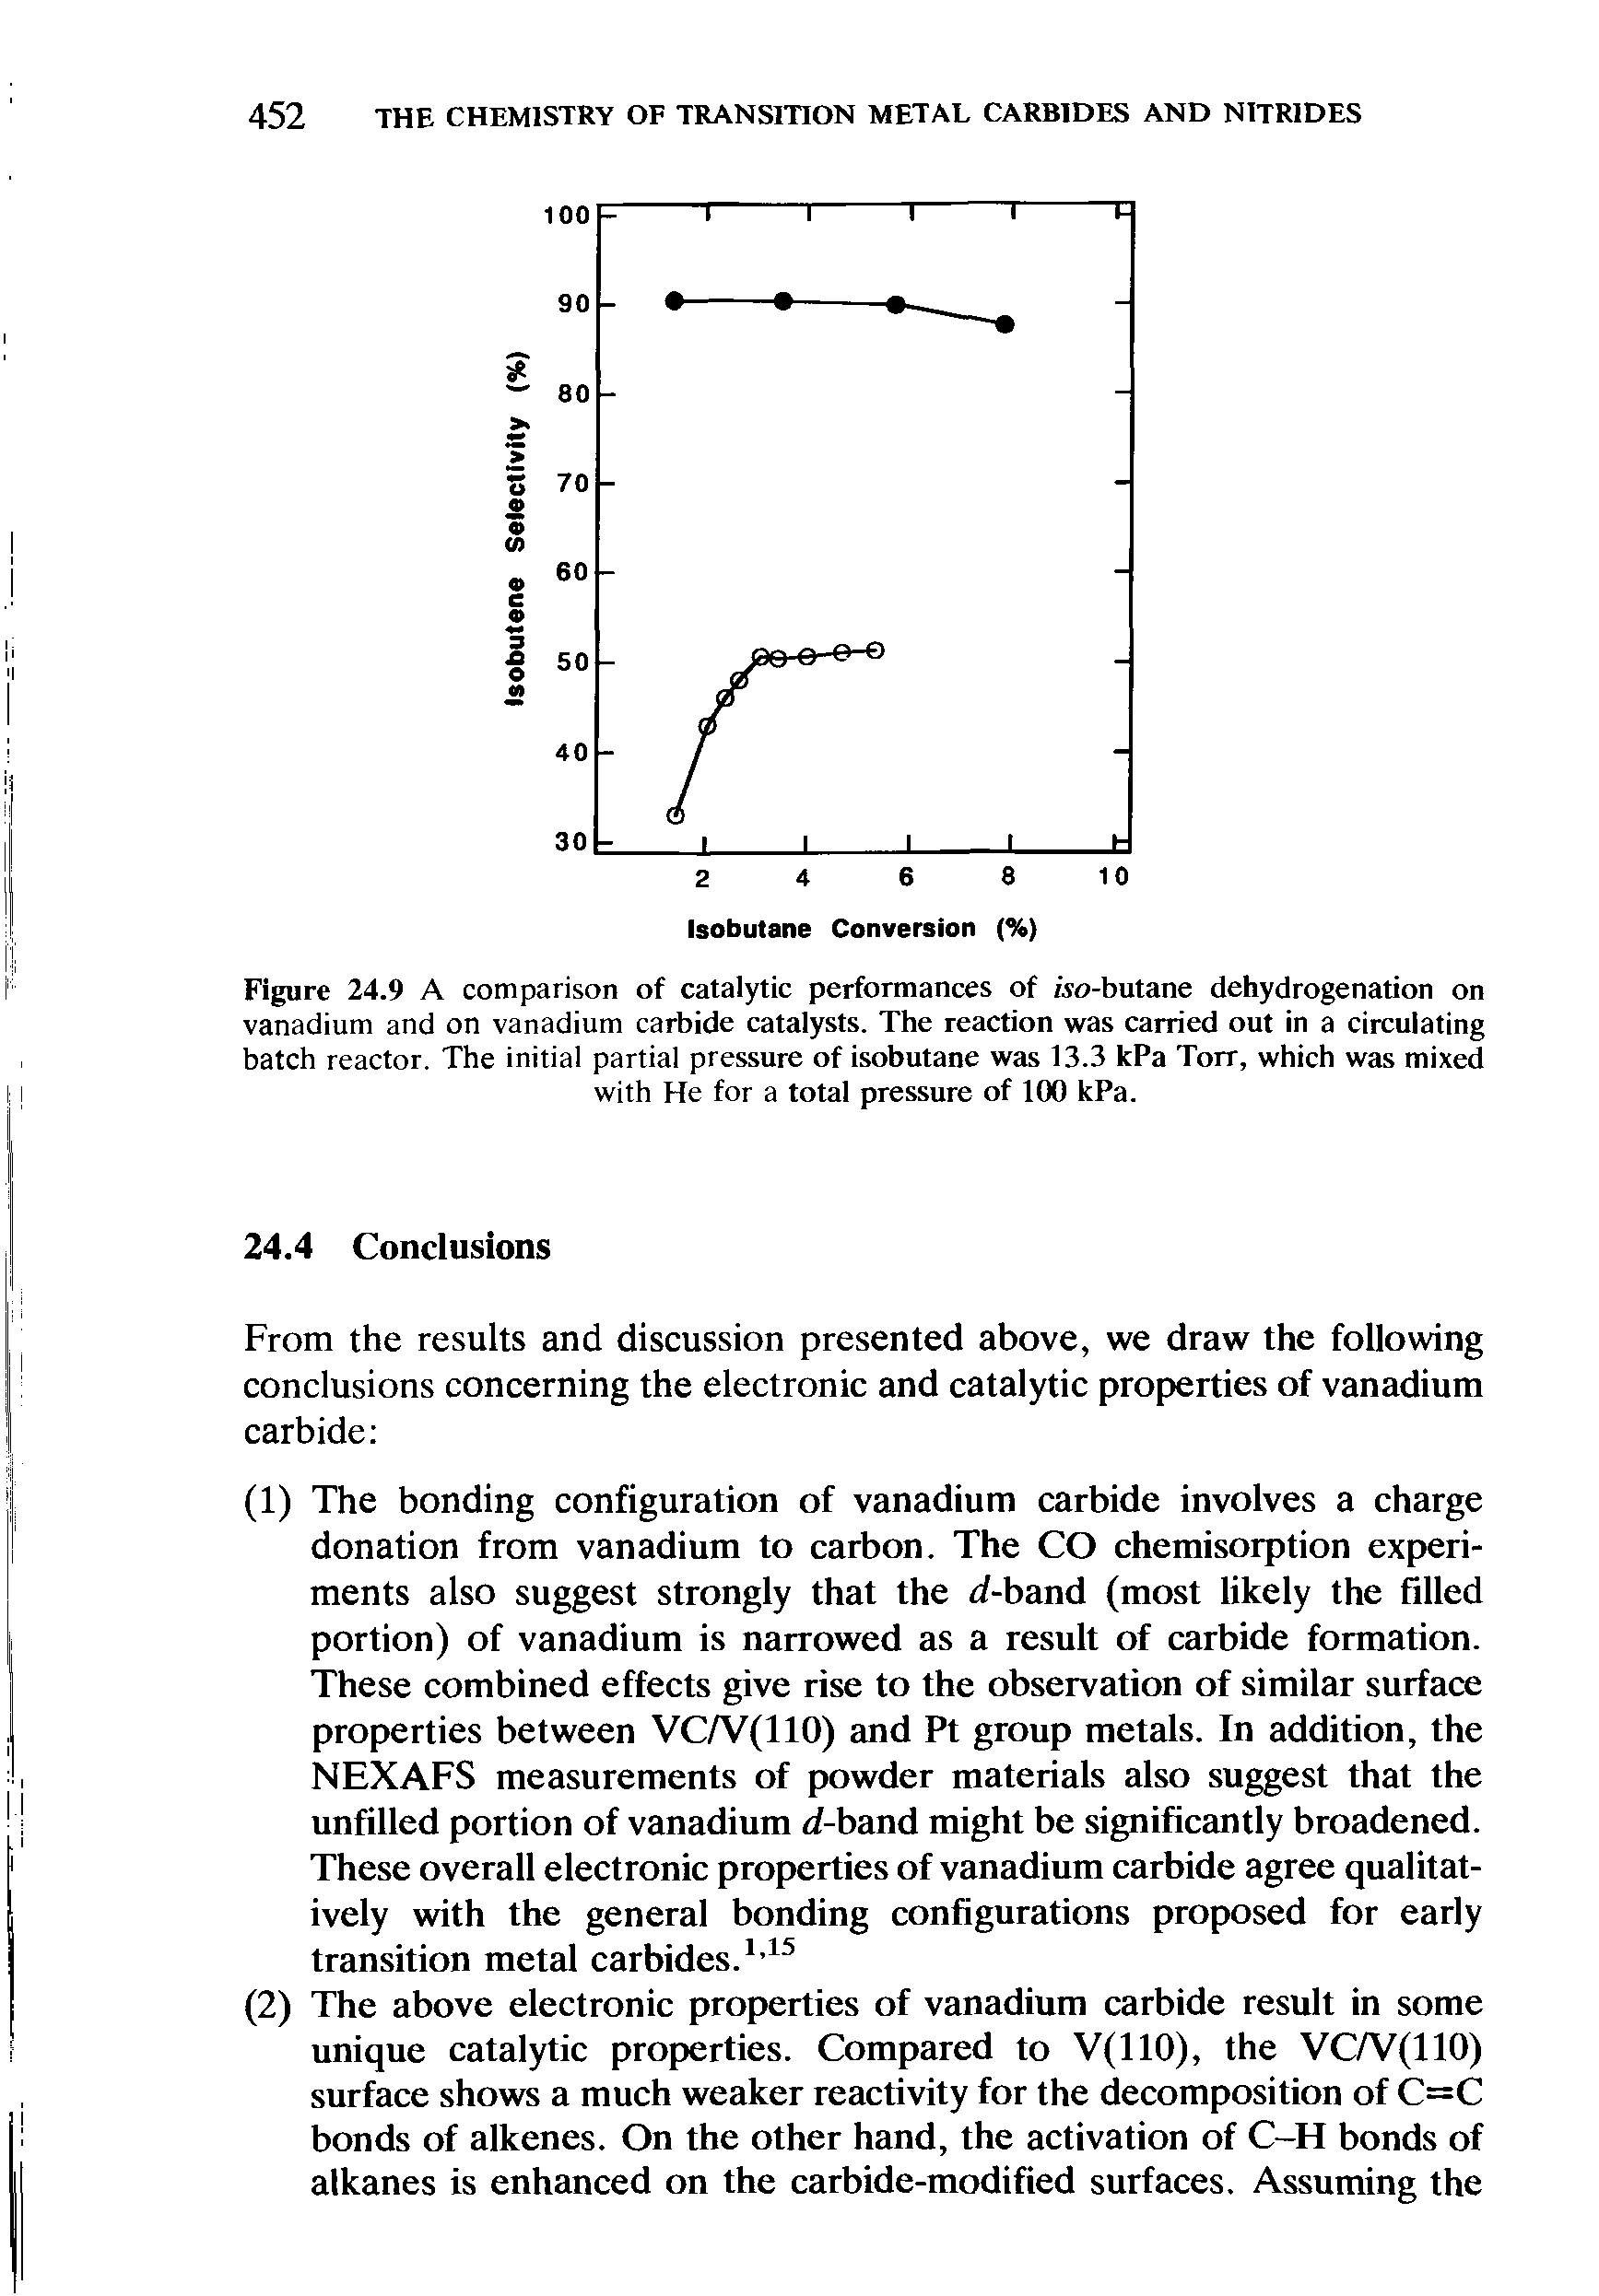 Figure 24.9 A comparison of catalytic performances of iso-butane dehydrogenation on vanadium and on vanadium carbide catalysts. The reaction was carried out in a circulating batch reactor. The initial partial pressure of isobutane was 13.3 kPa Torr, which was mixed with He for a total pressure of 100 kPa.